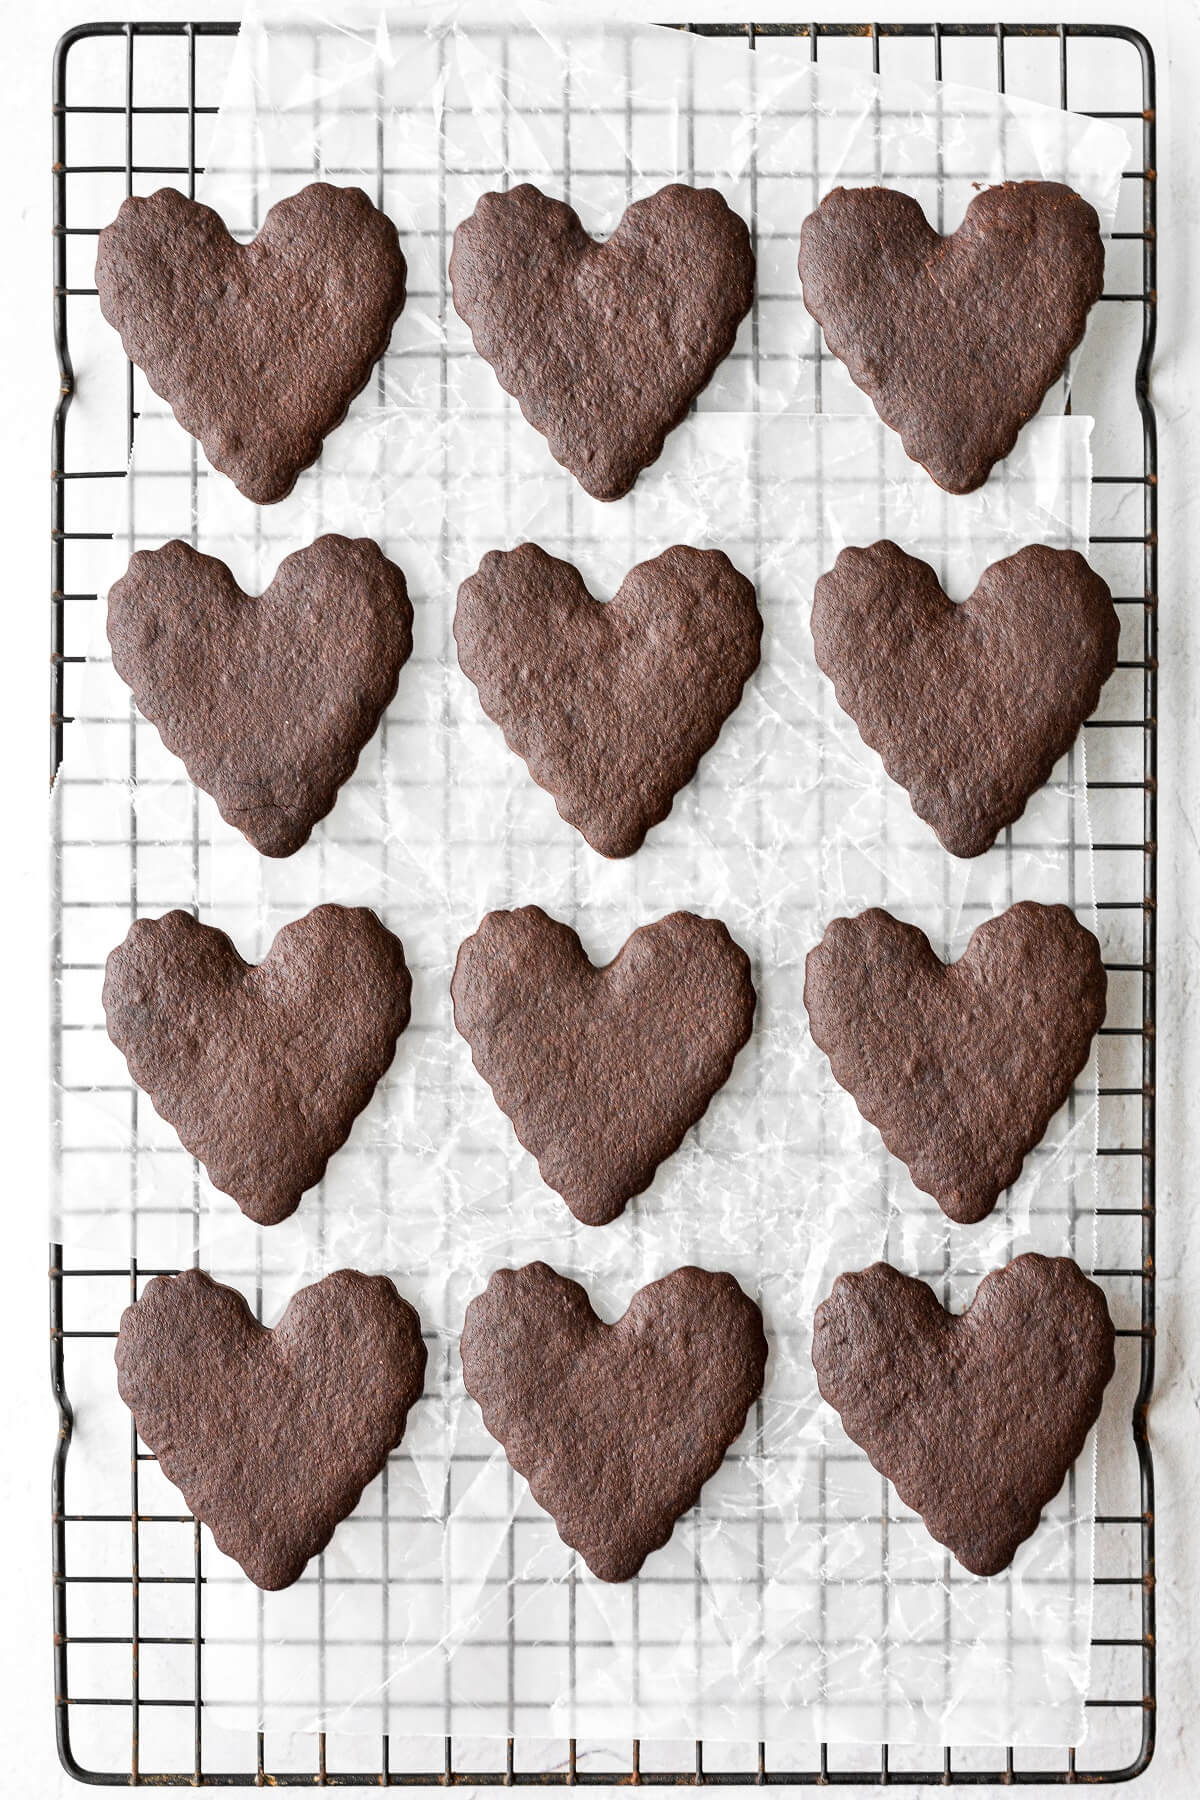 Heart shaped chocolate sugar cookies on a black cooling rack.